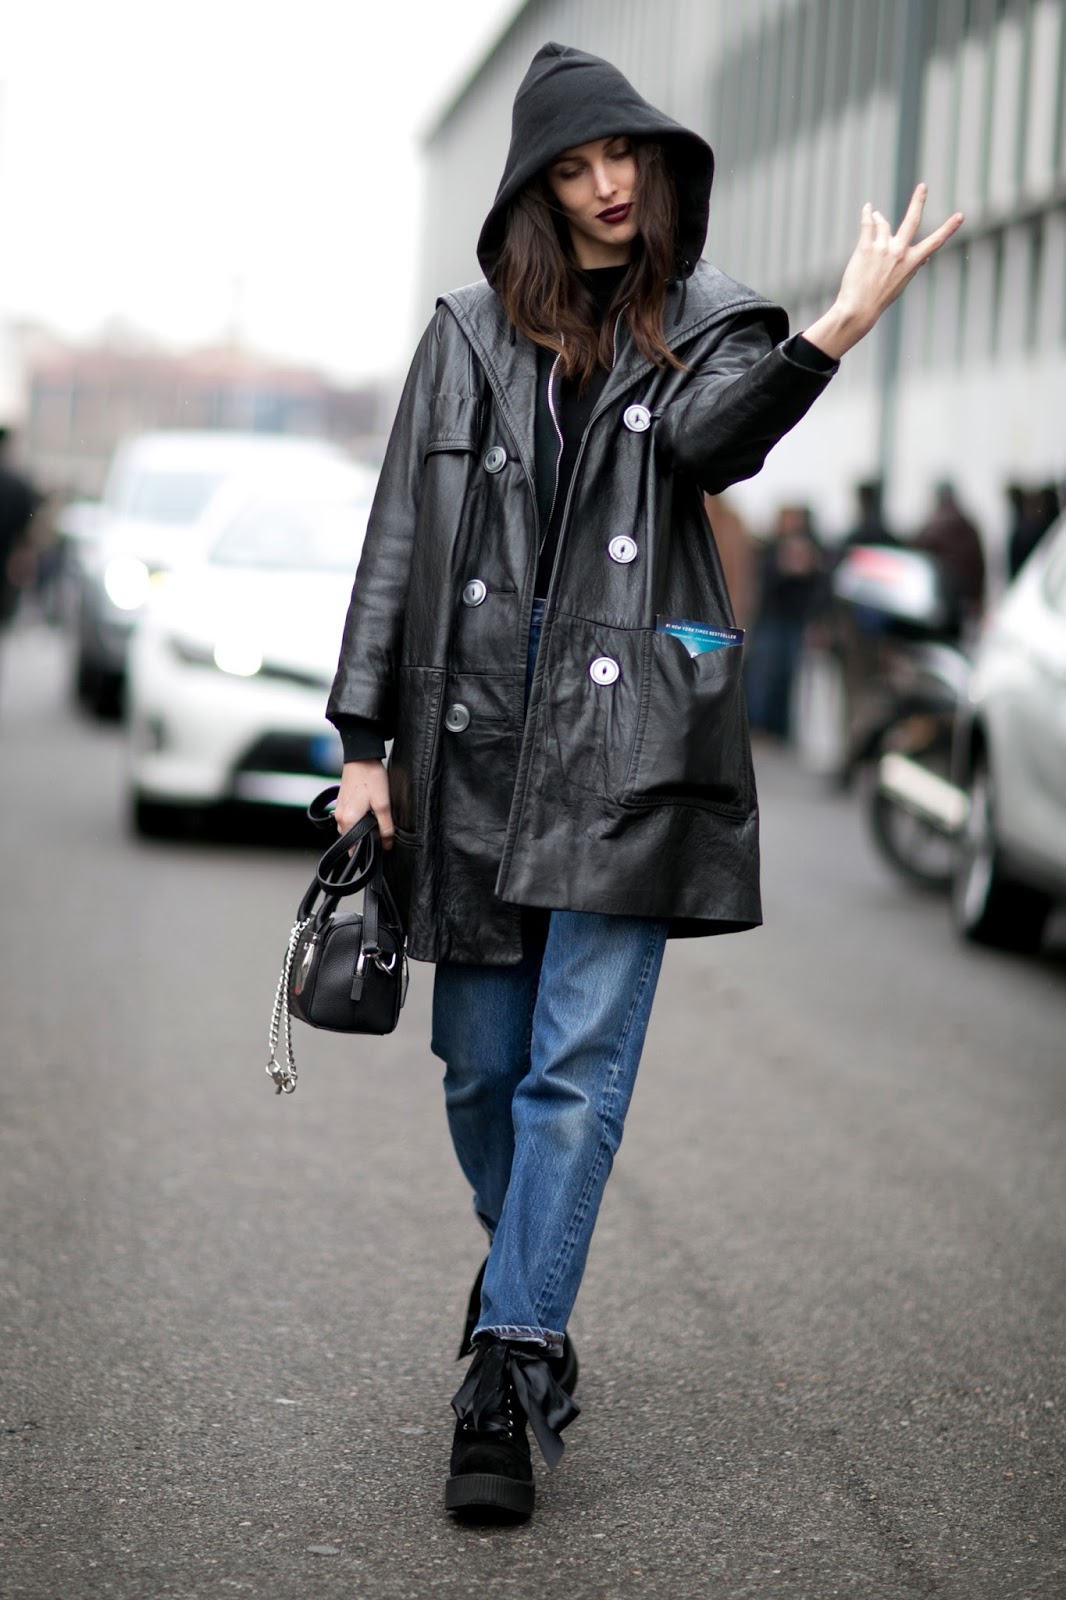 +51 street style grunge Looks & Inspirations - POLYVORE - Discover and ...